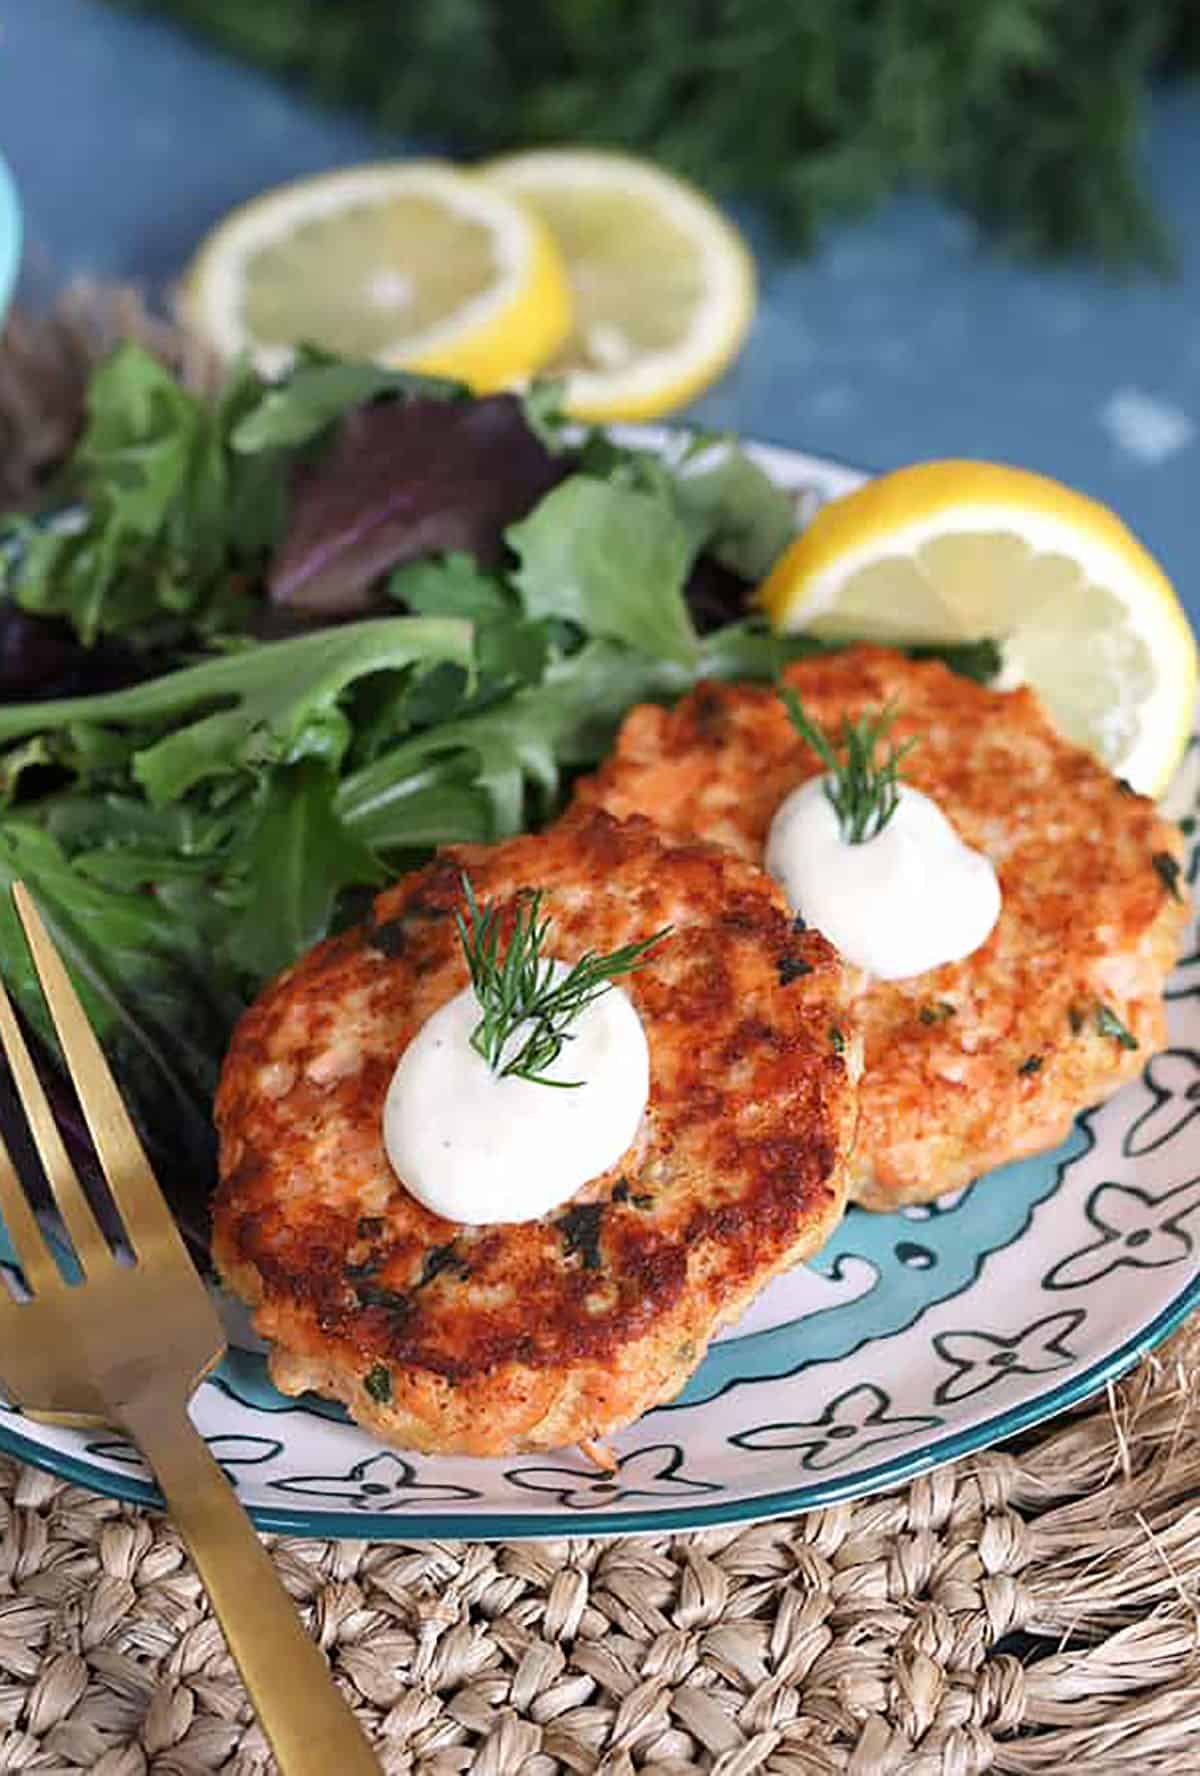 Salmon Cakes recipe with Lemon Dill Sauce on a plate on a wicker placemat